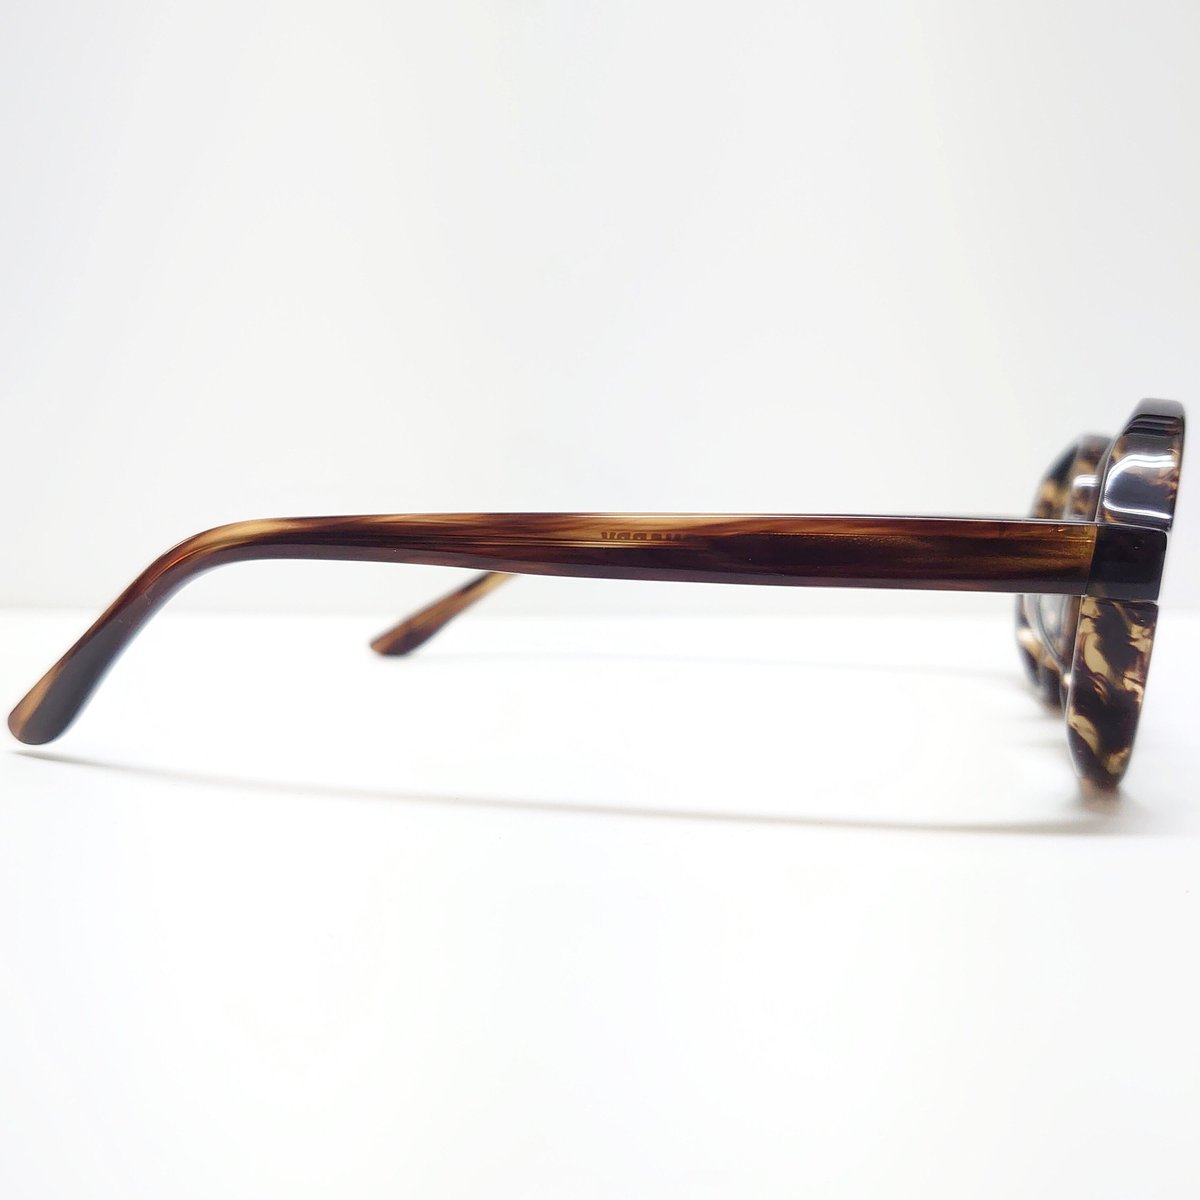 EFFECTOR SNAPPY CO | OPTICAL TAILOR CRADLE